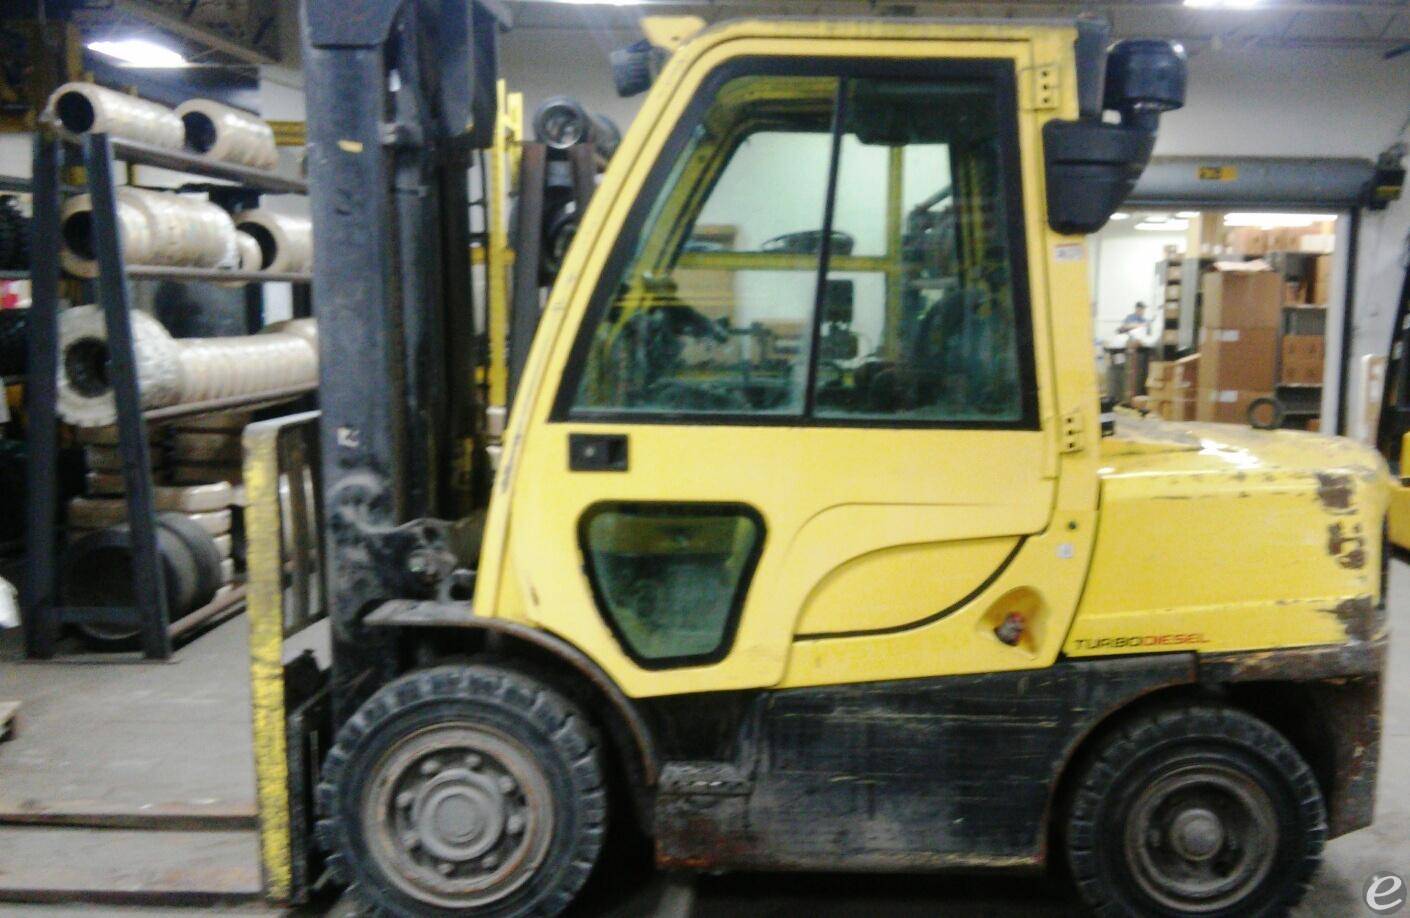 2011 Hyster H90FT